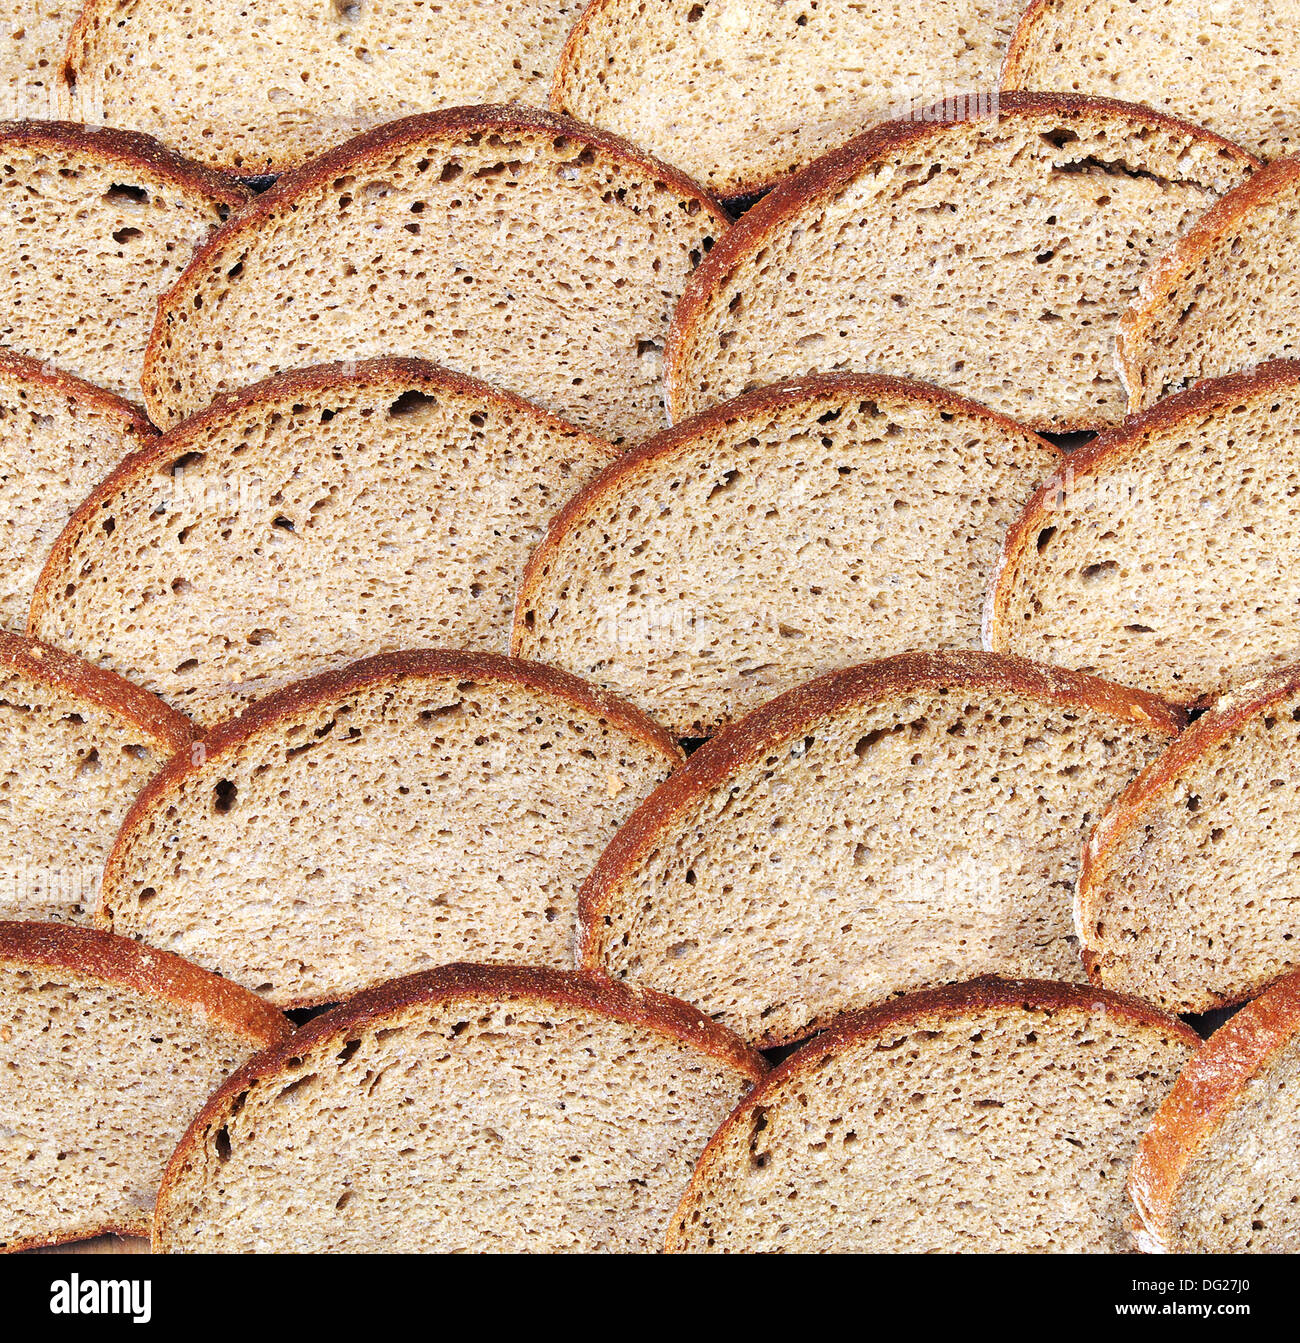 Bread from rye flour background Stock Photo